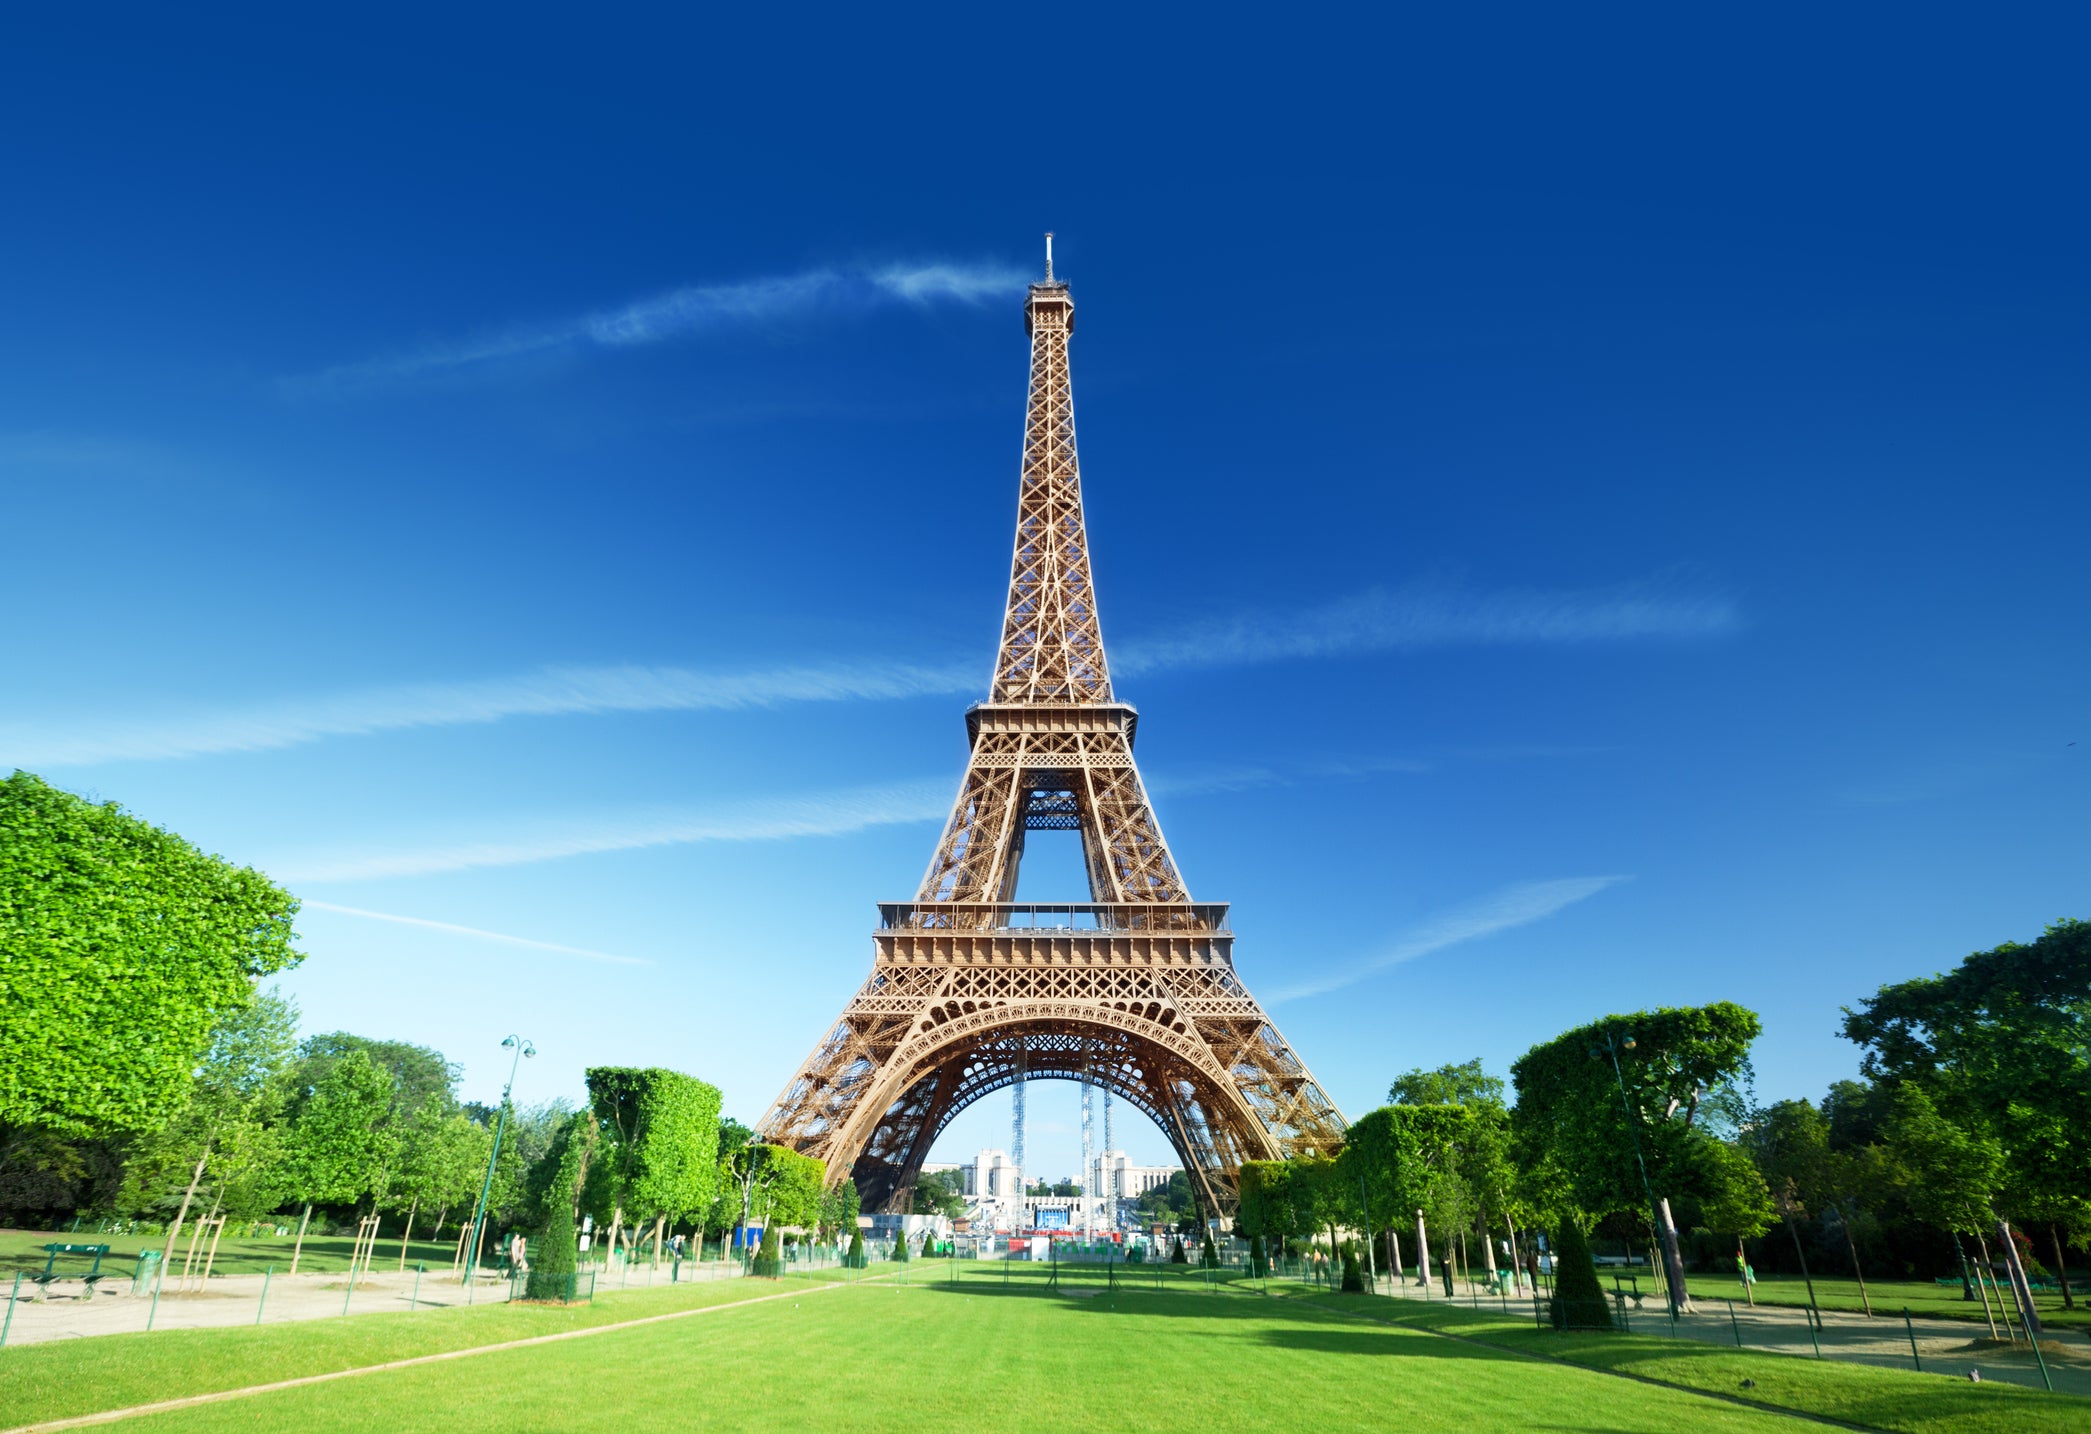 The Eiffel Tower stands 330m tall